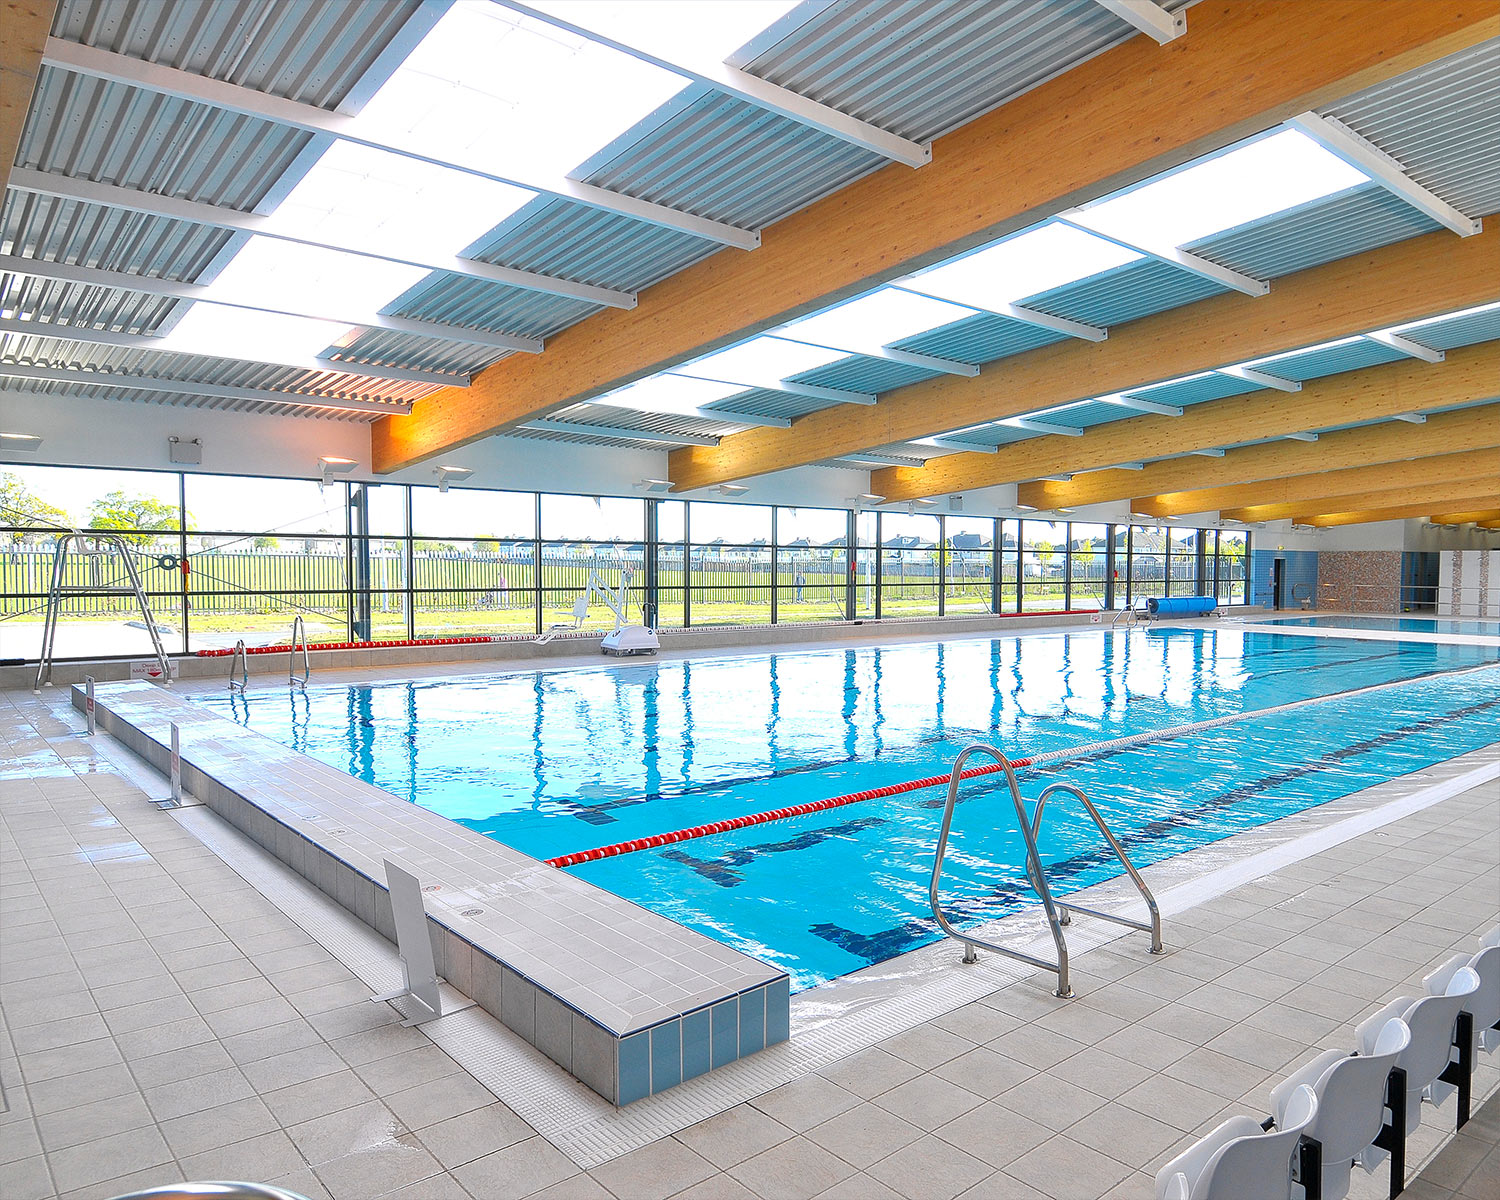 2010 Dundrum Swimming Pool